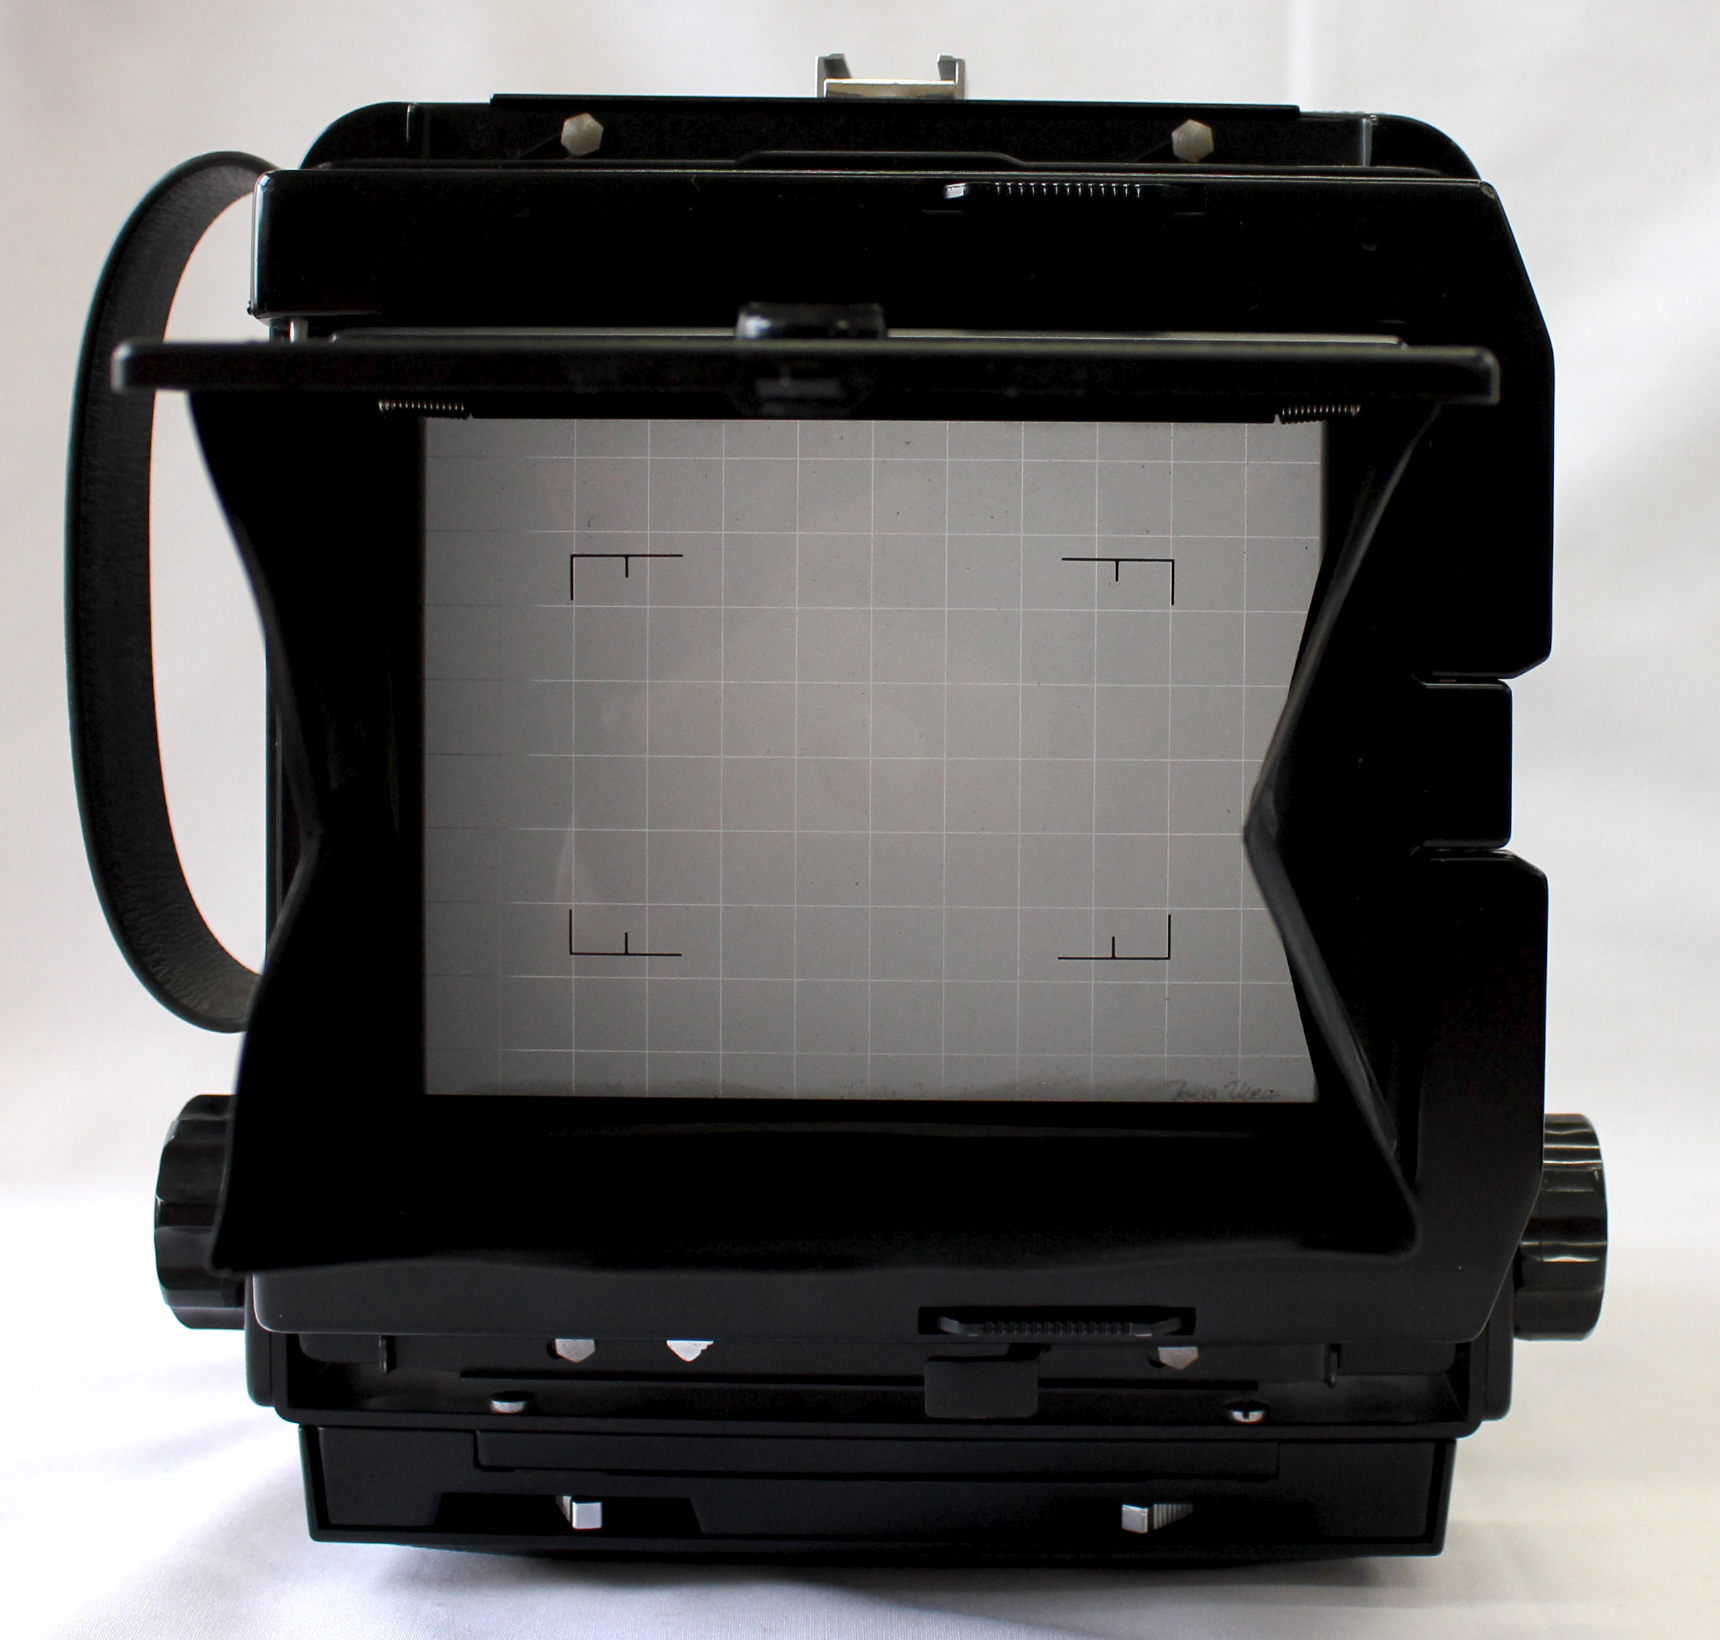  Toyo Field 45A 4x5 Large Format Film Camera with Revolving Back and 3 Cut Film Holders from Japan Photo 9